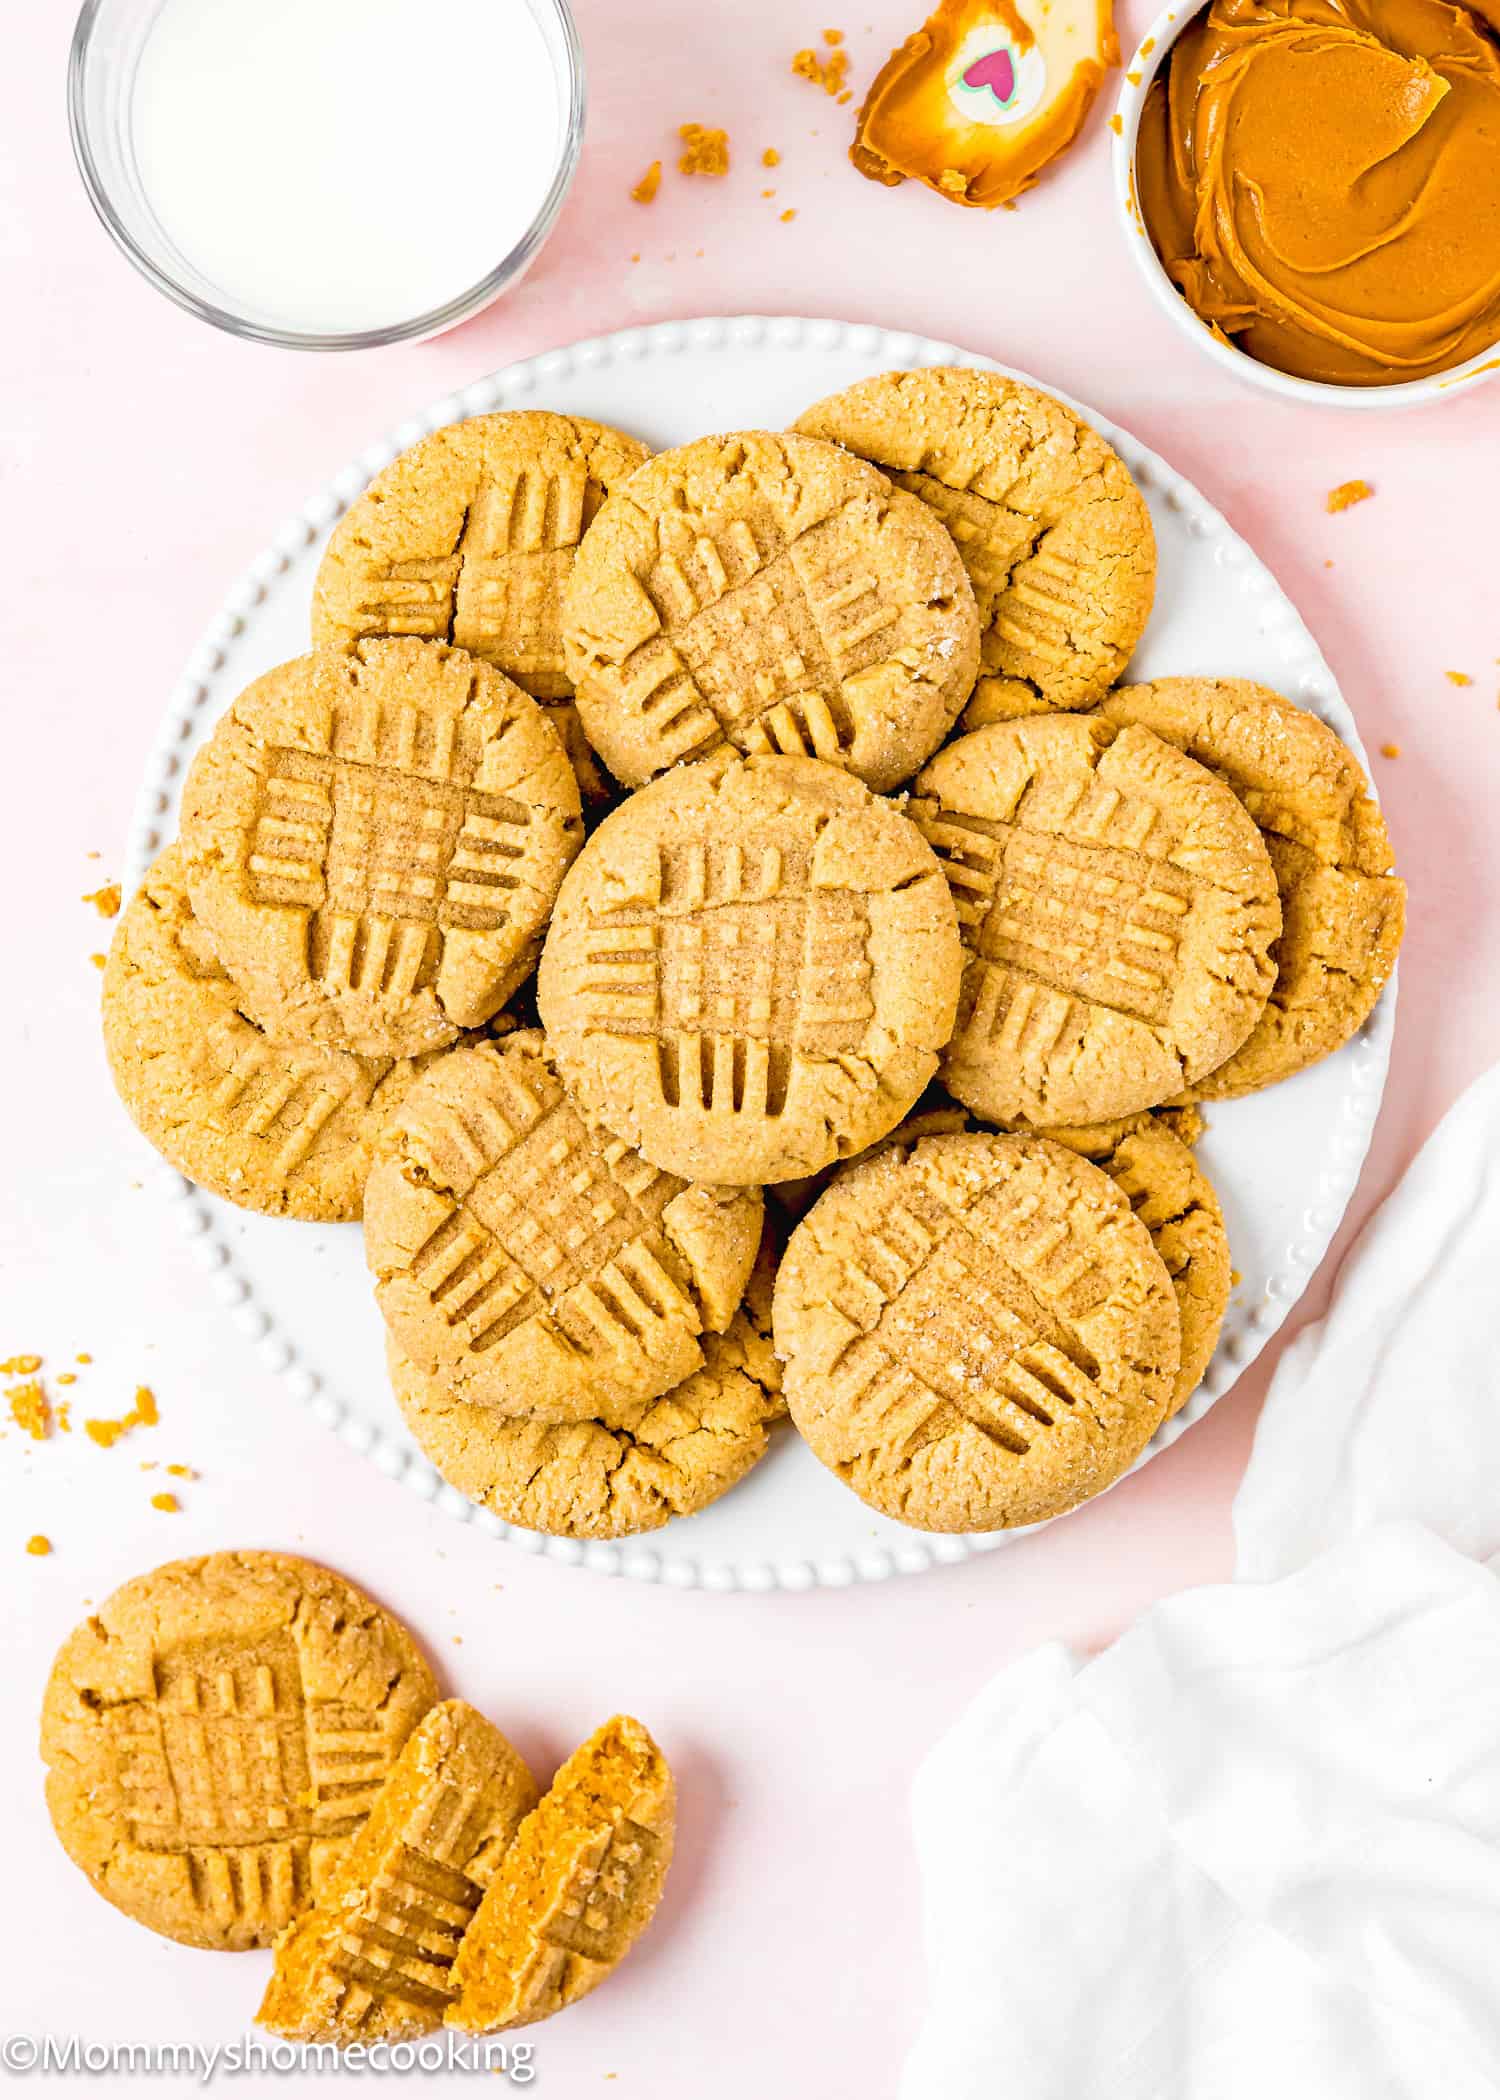 Eggless Peanut Butter Cookies in a a plate over a pink surface with peanut butter, spatula and a glass of milk on the side.